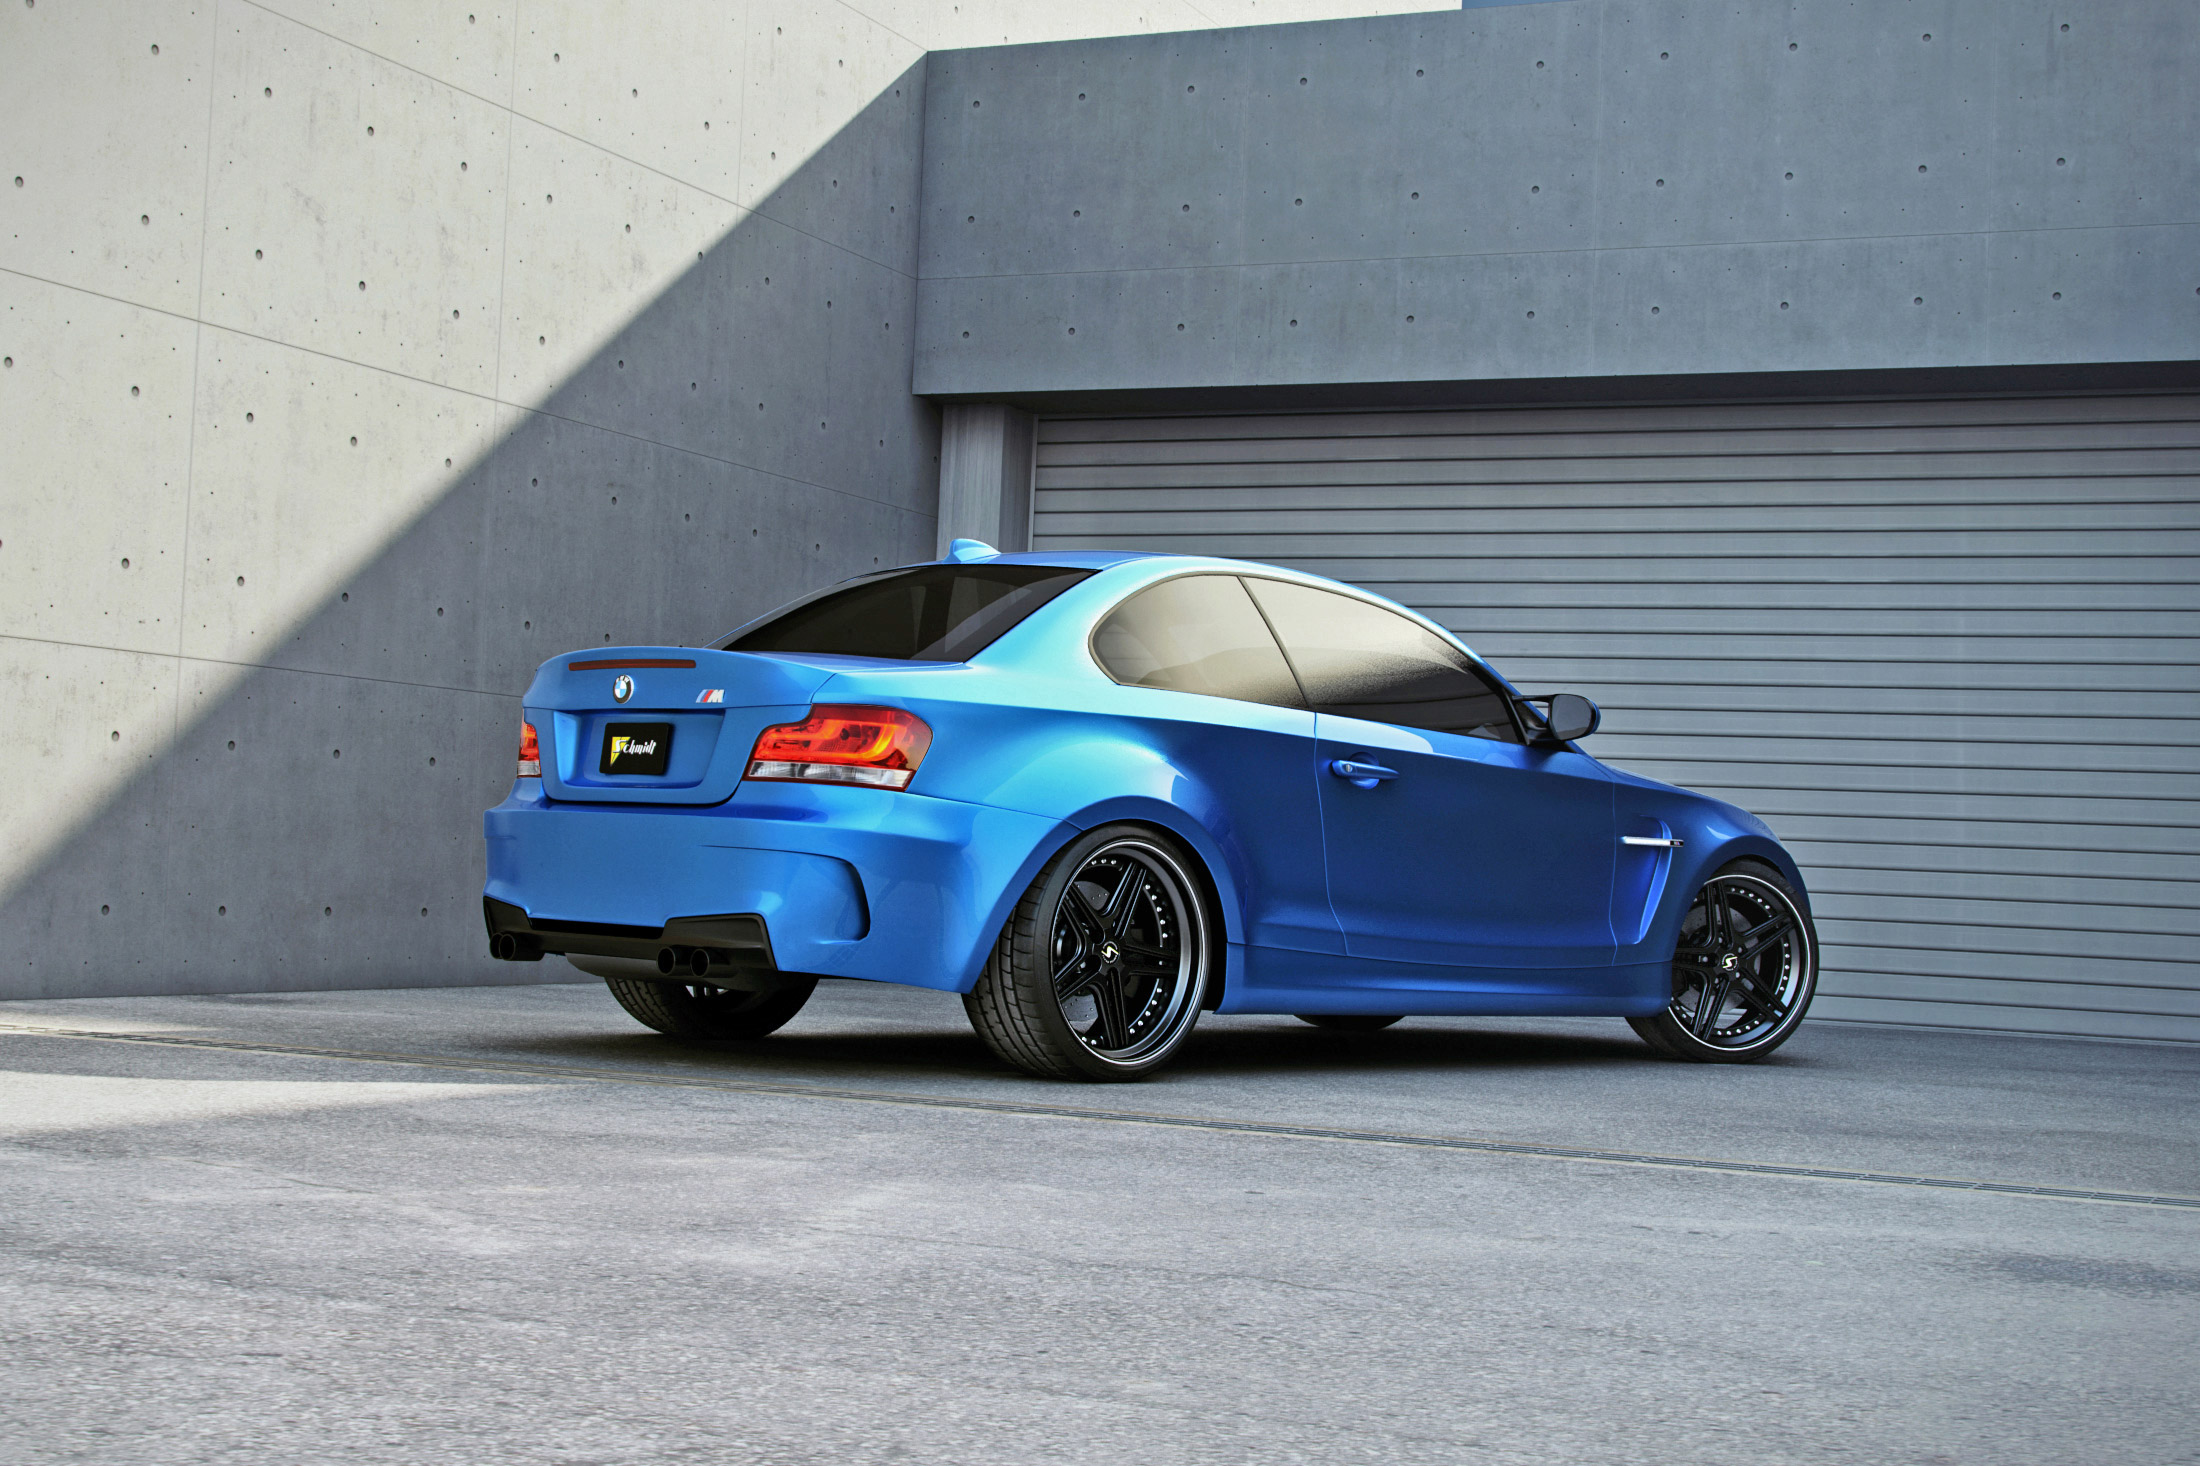 BMW 1M by BEST Cars and Bikes